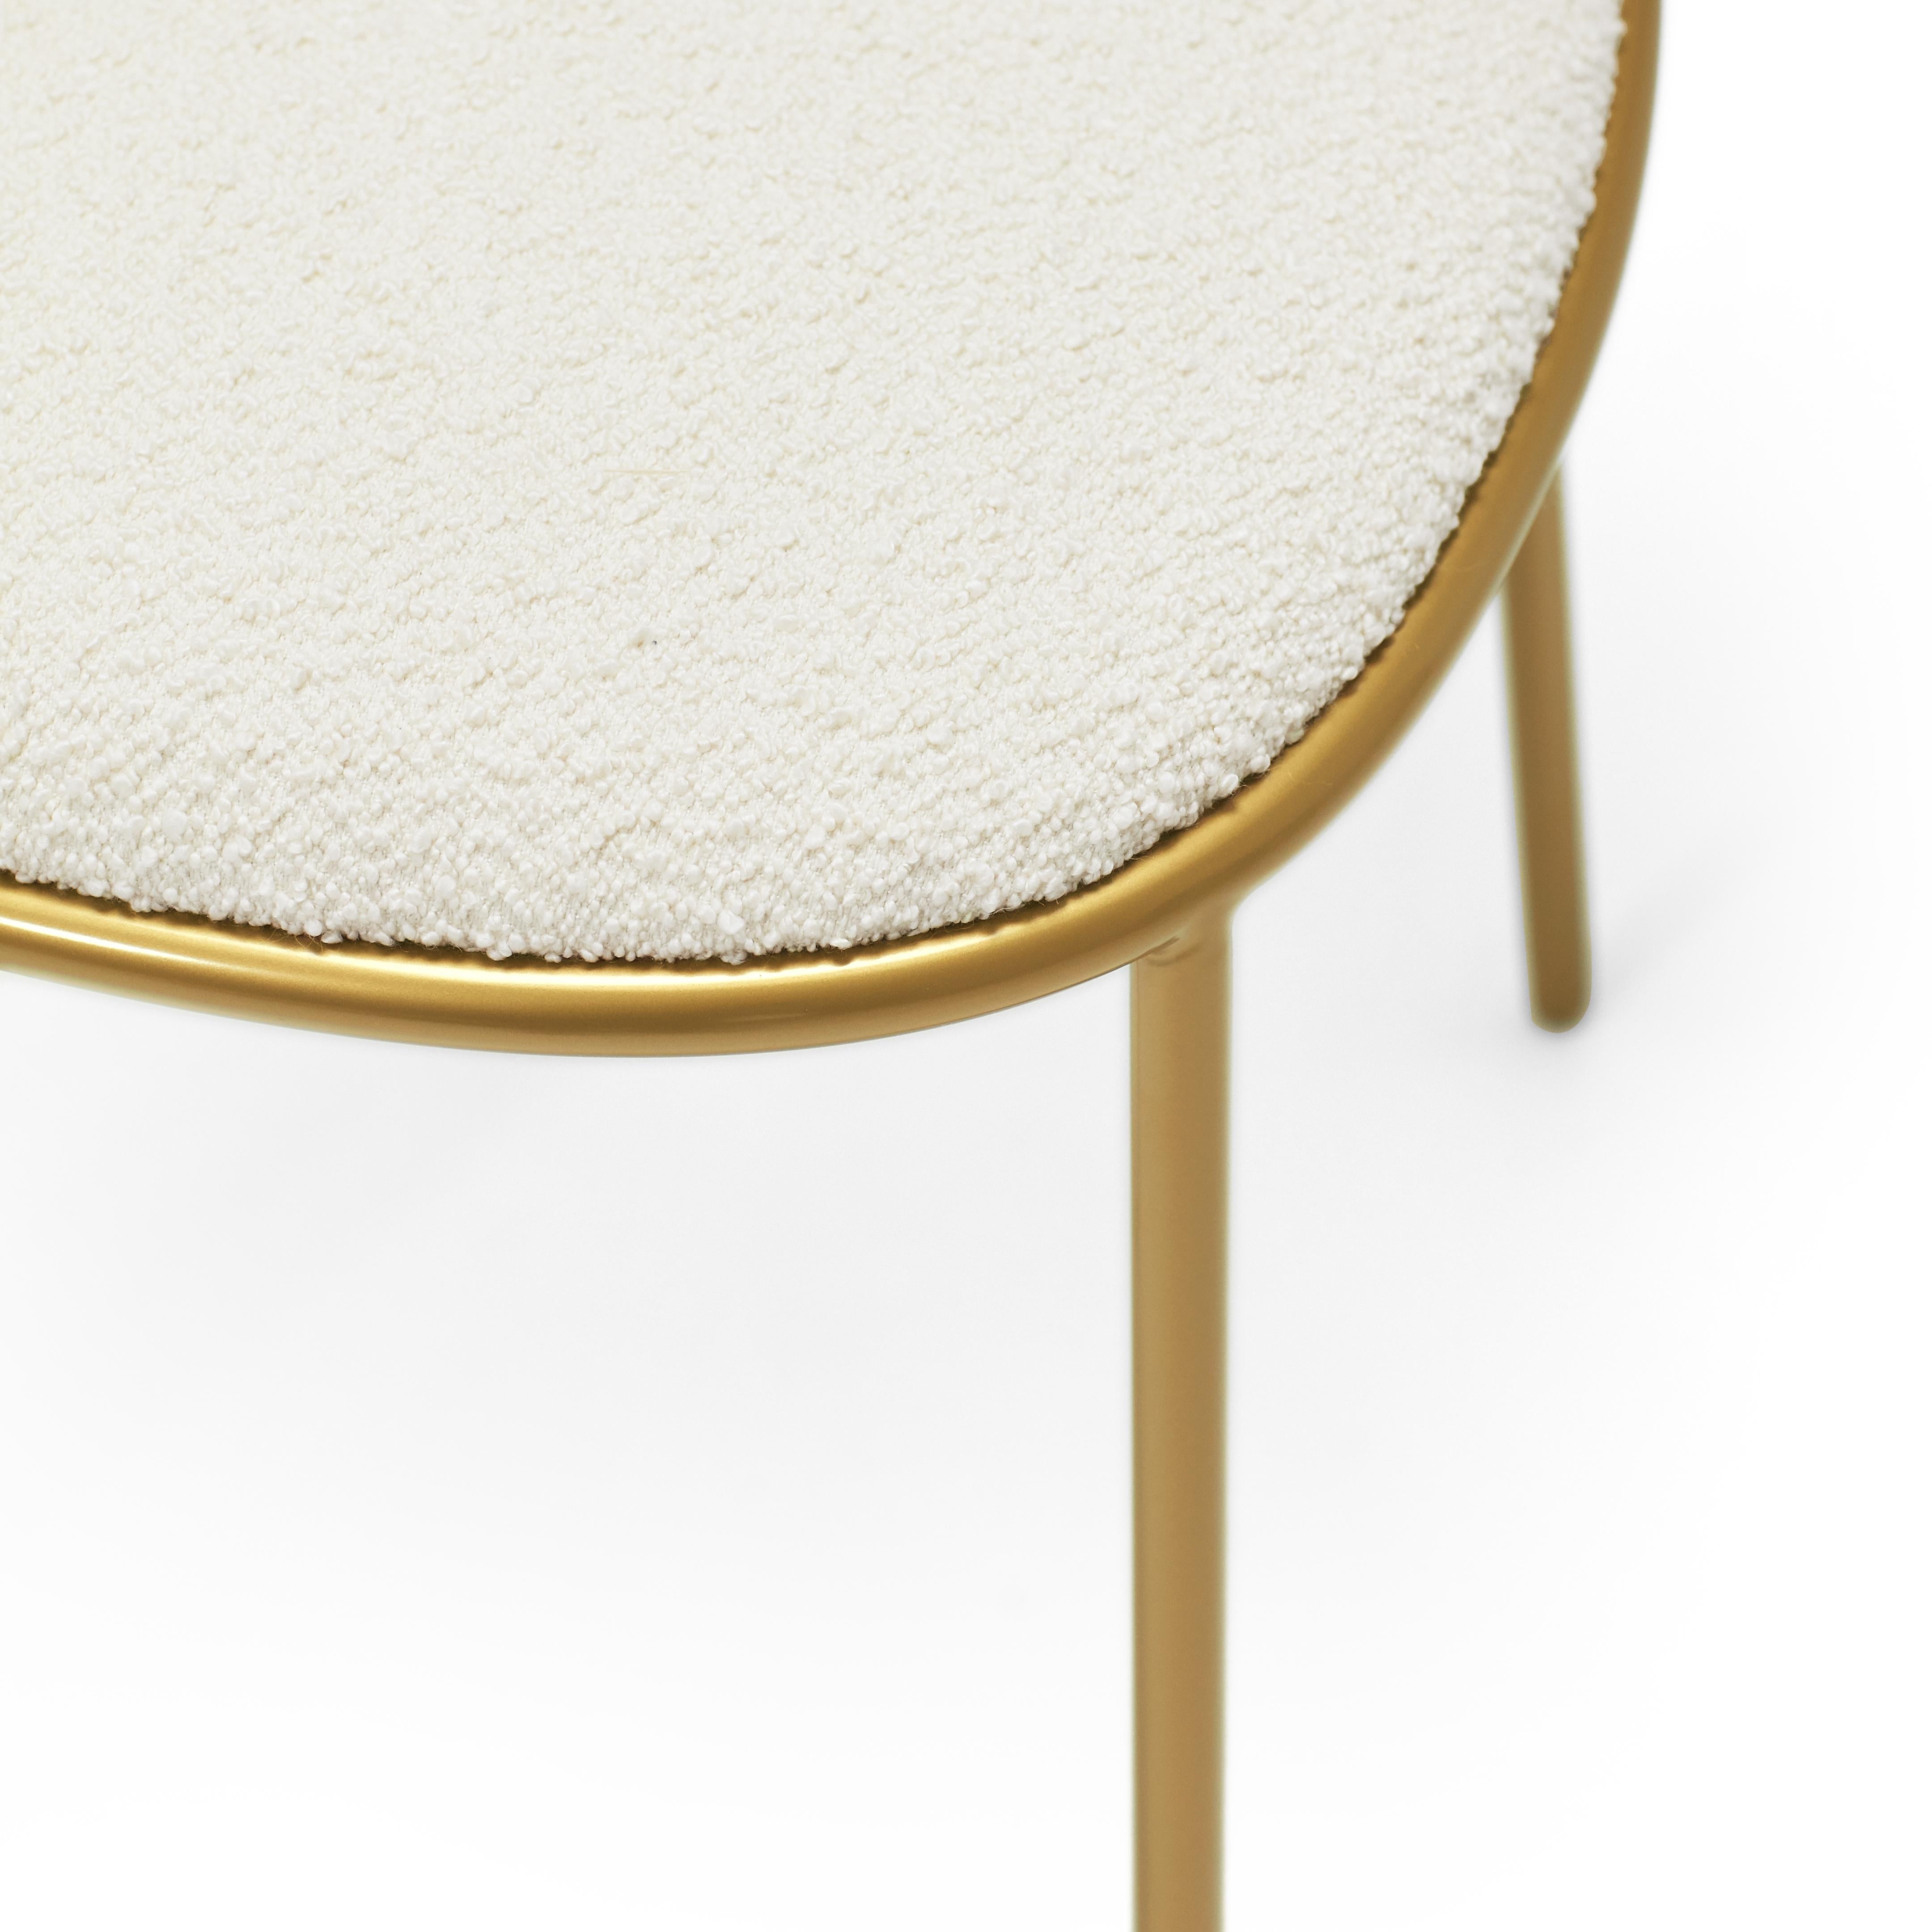 Modern Contemporary Ivory Upholstered Dining Chair, Stay by Nika Zupanc